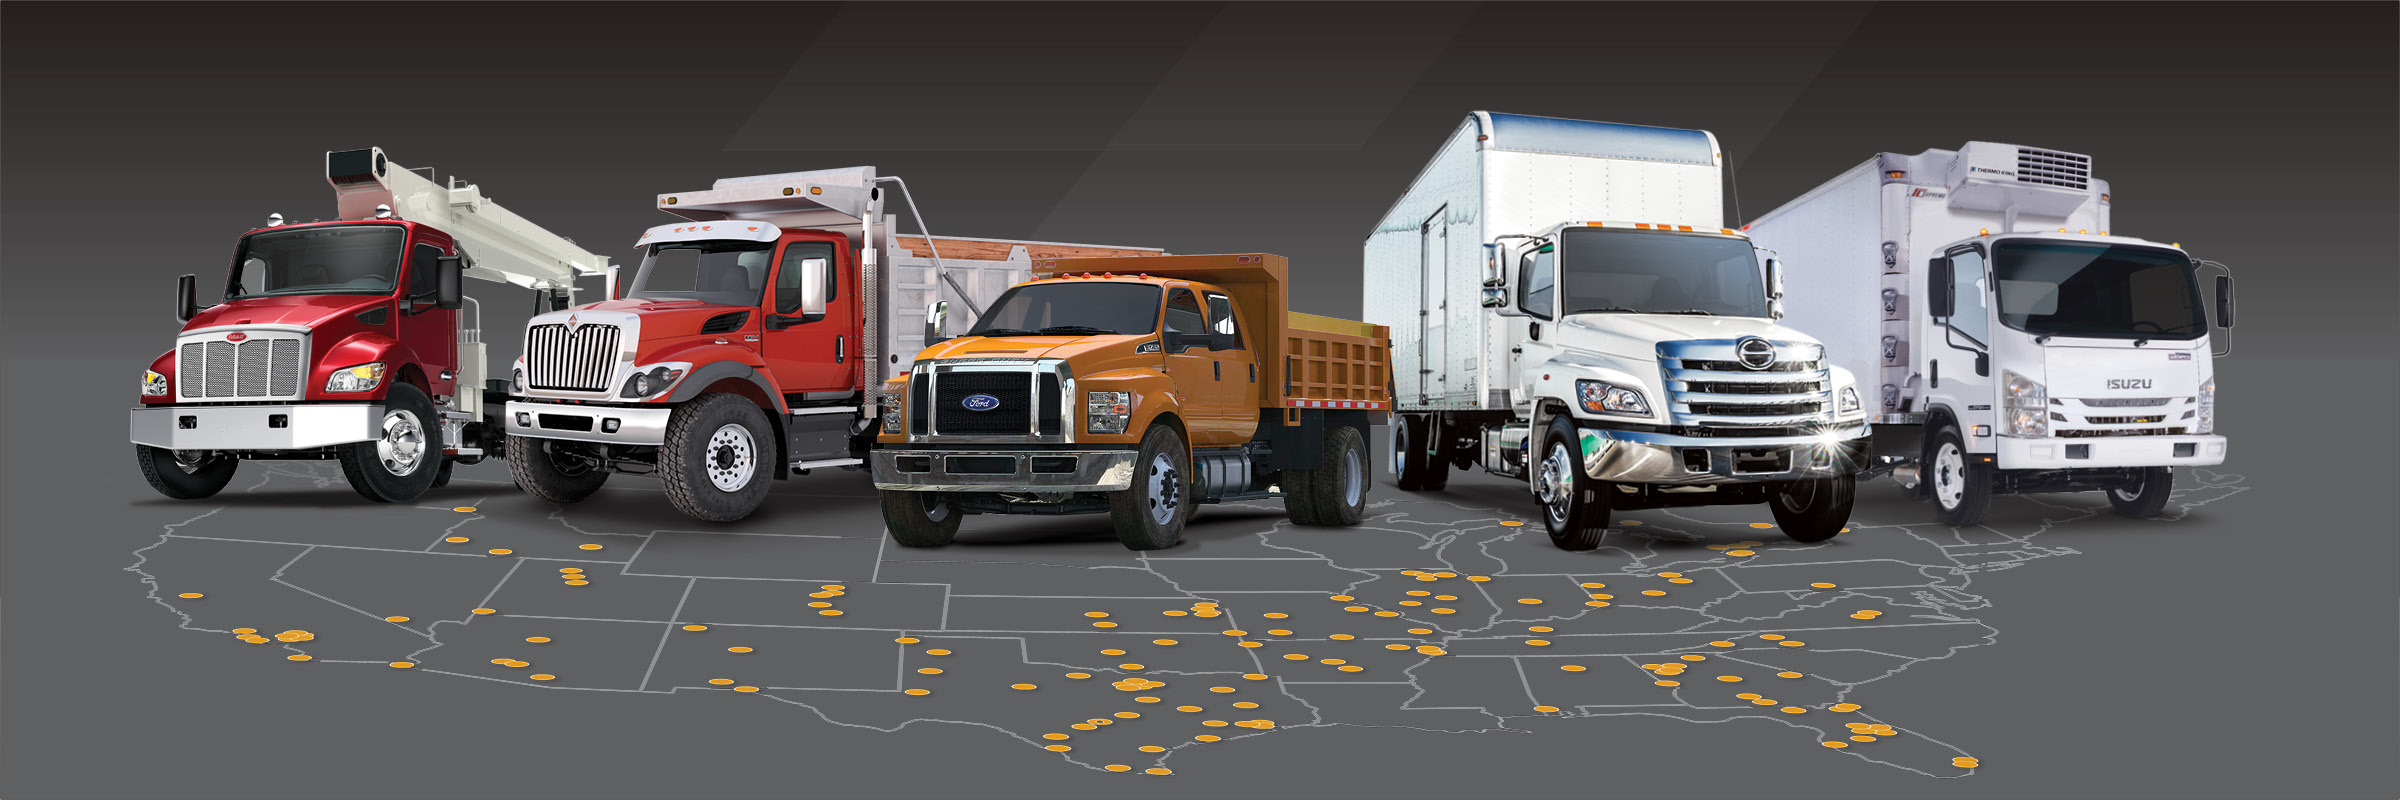 Line up of vocational trucks | work-ready trucks | Ready to Roll